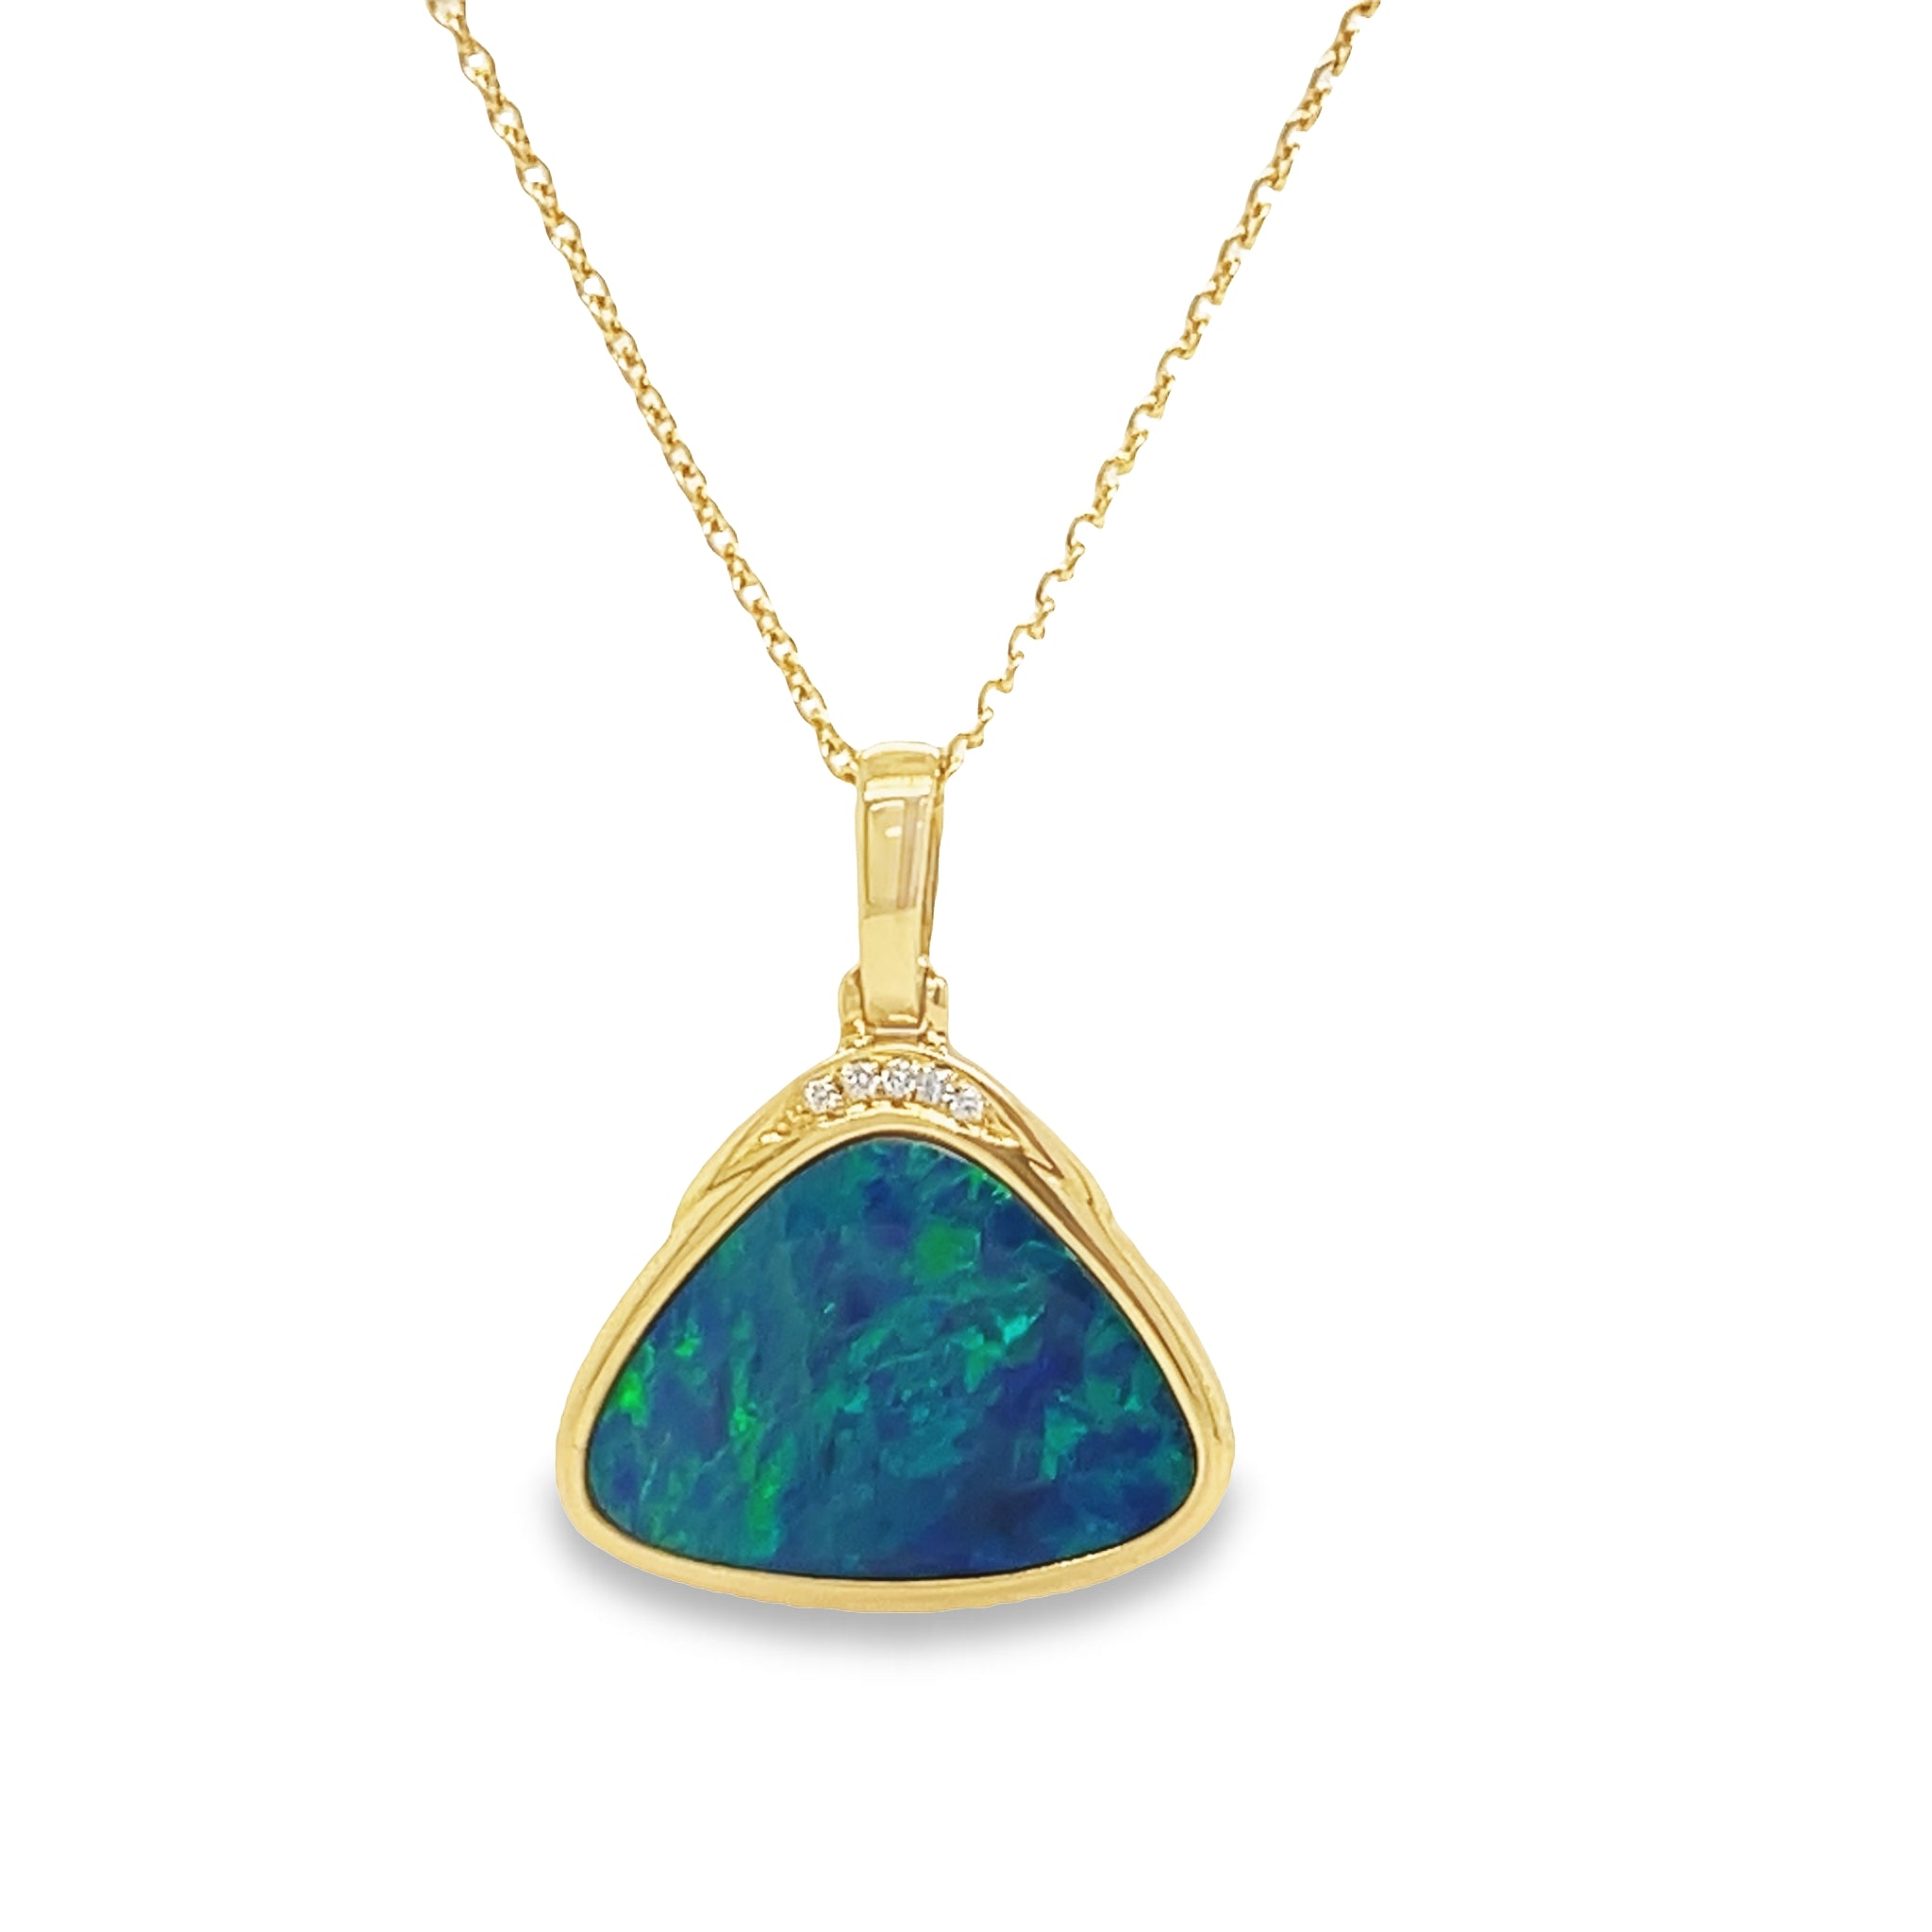 Sparkle and shine with this stunning 14k white gold pendant necklace featuring a dazzling triangular black Australian opal and round diamond accents. This eye-catching pendant contains 4.80 carats of black opal and 0.02 carats of round diamonds for a true statement of elegance and style.  18.00 x 26.00 mm 